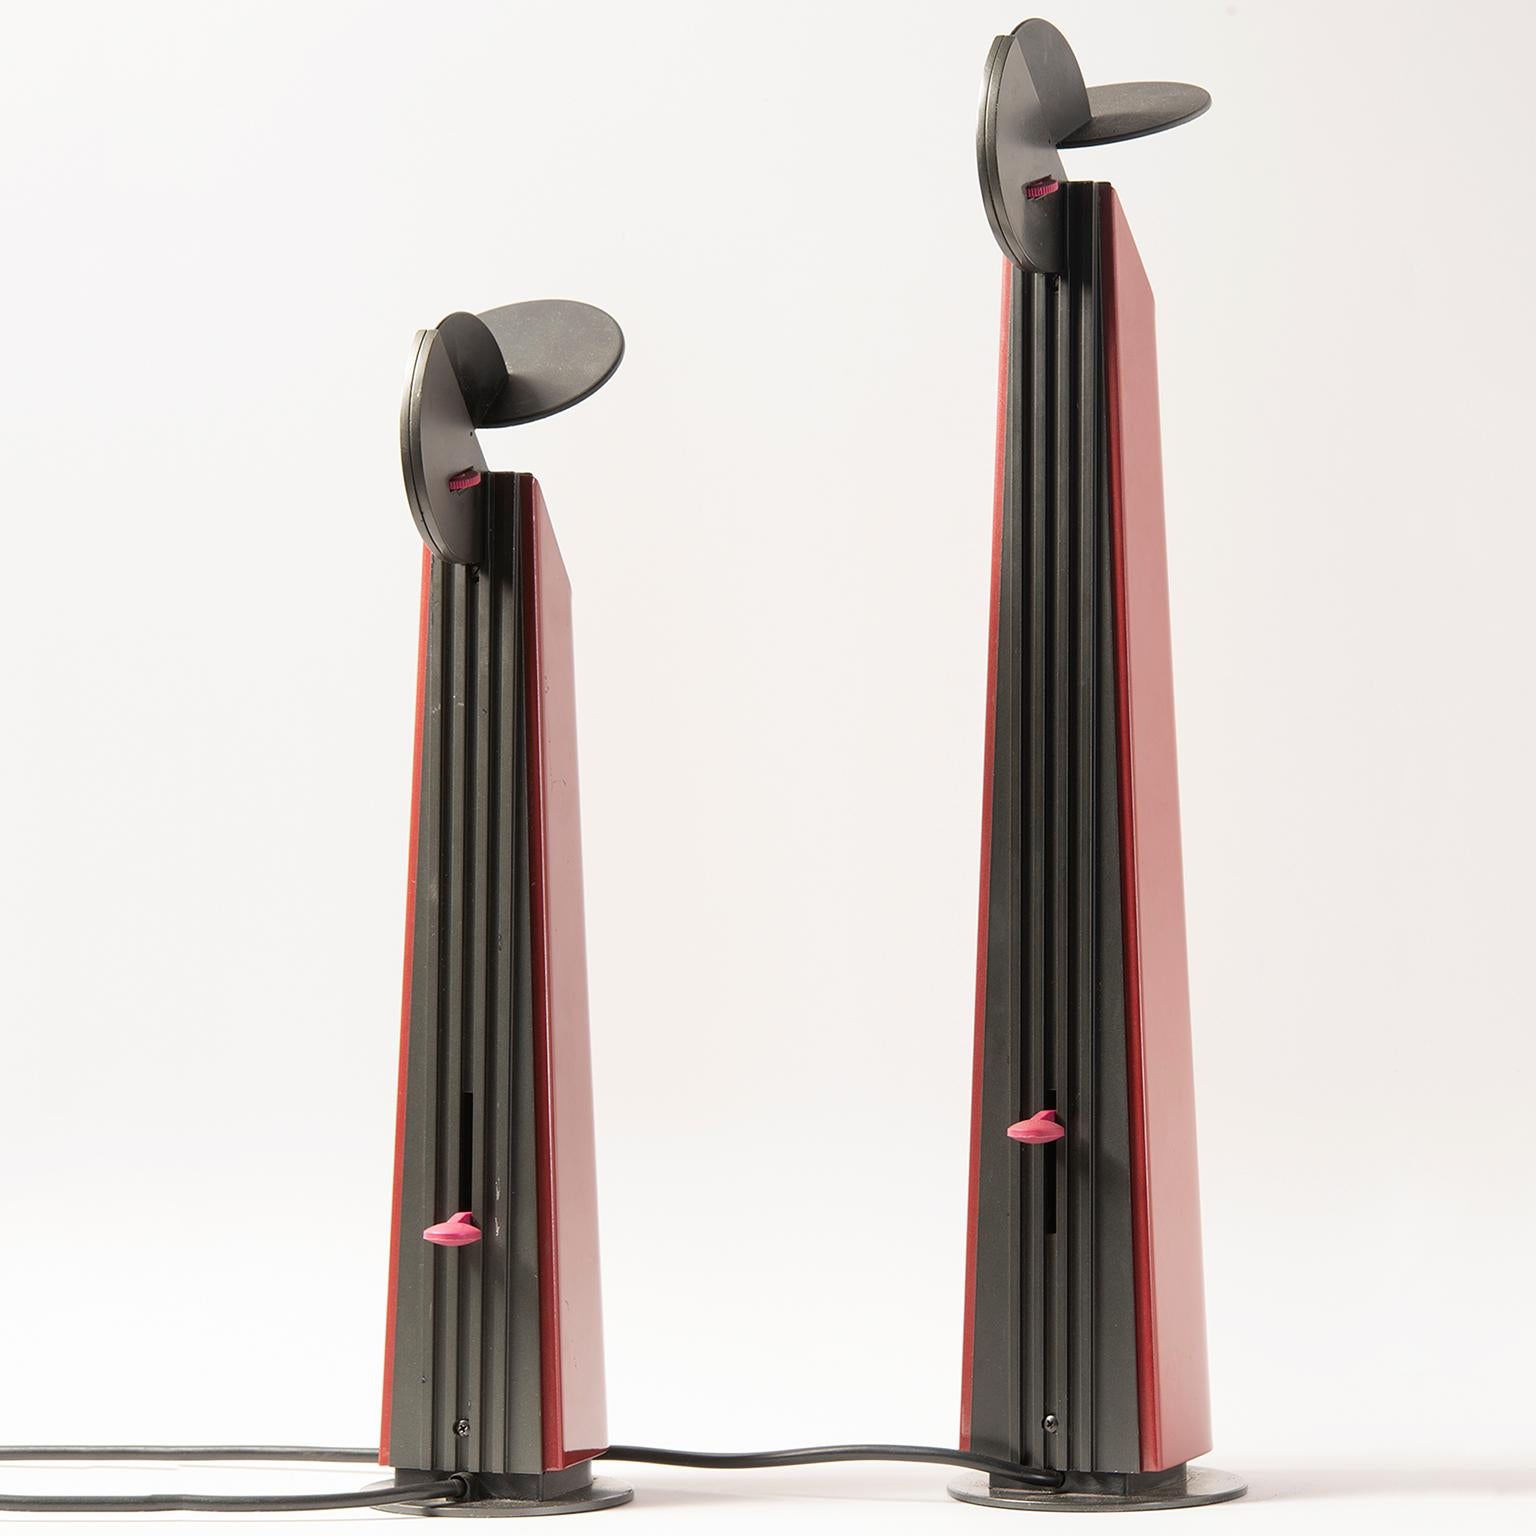 Two Gibigiana lamps from Italy designed by Achille Castiglioni for Flos feature dark red bases with black tops, circa 1980s. The Gibigiana lamp casts light in a very specific spot, directing it through a special reflective mechanism. The designer